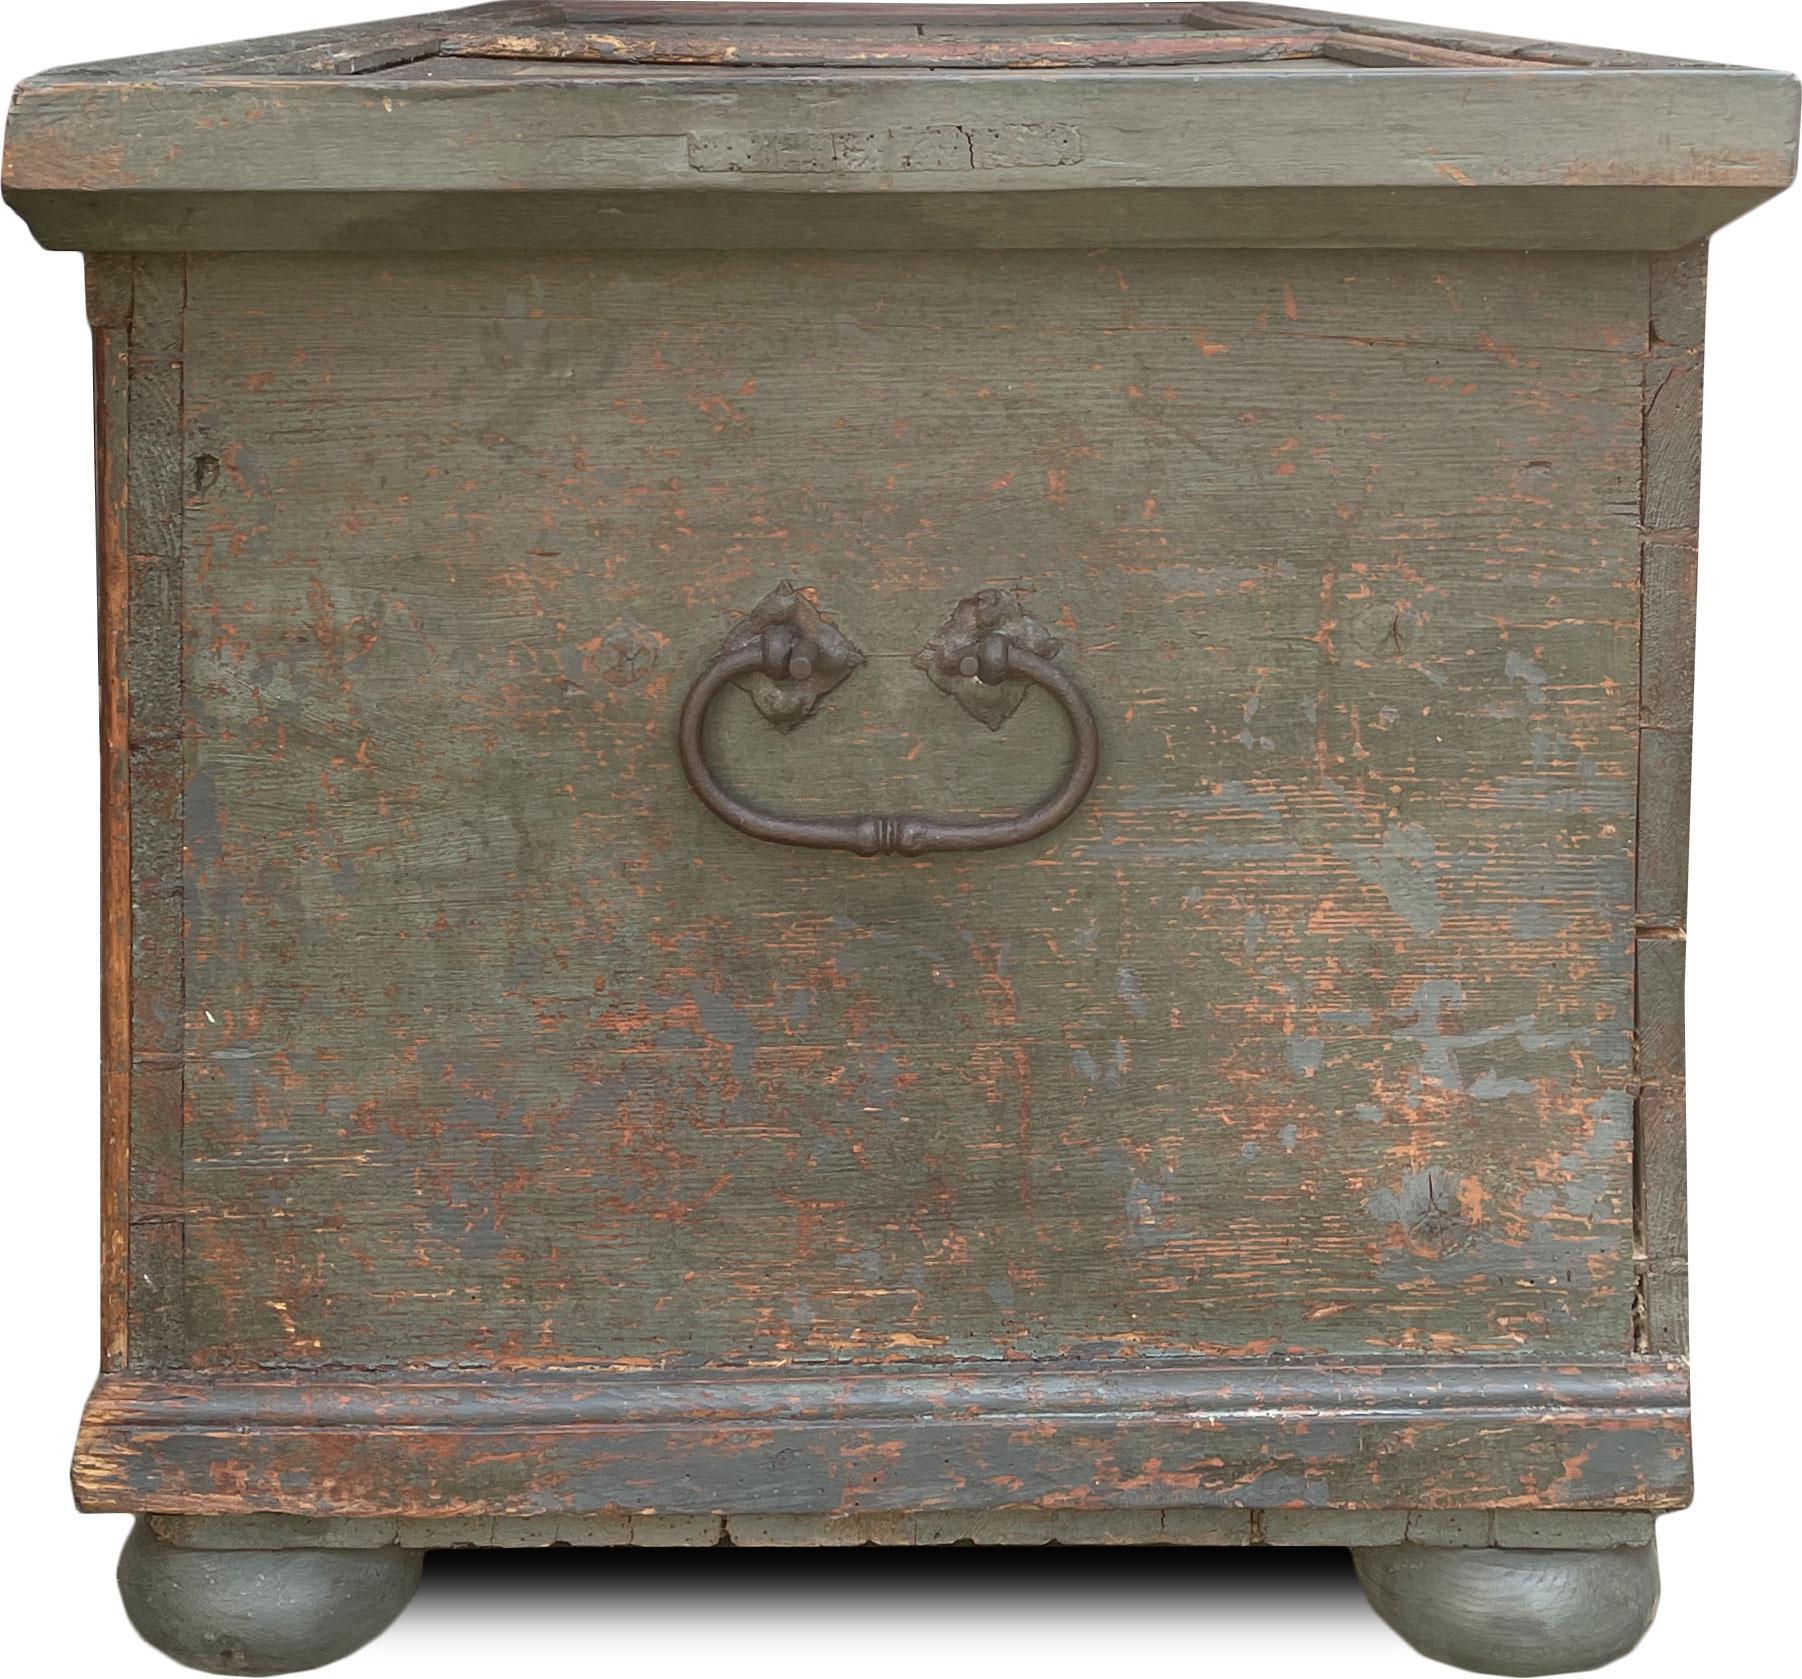 Tyrolean painted chest
Measures: H.67 - L.167 - P.72

Tyrolean painted chest entirely painted in green / blue, with three panels on the front containing cups of flowers. Also on the front four semi-columns and intaglio motifs characterize the